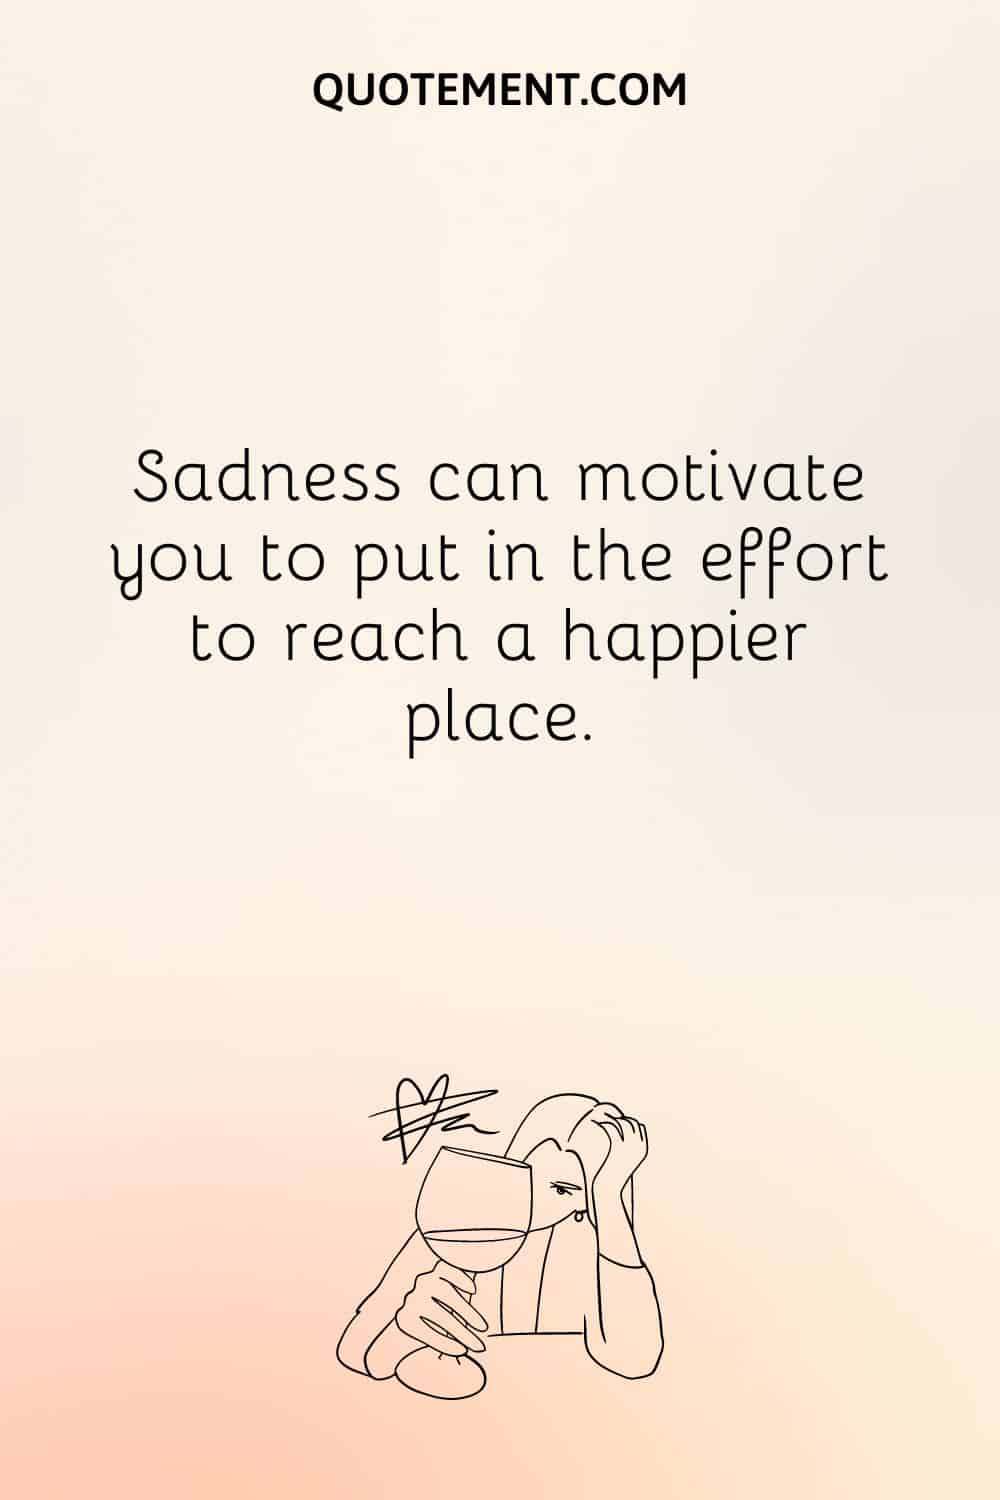 Sadness can motivate you to put in the effort to reach a happier place.